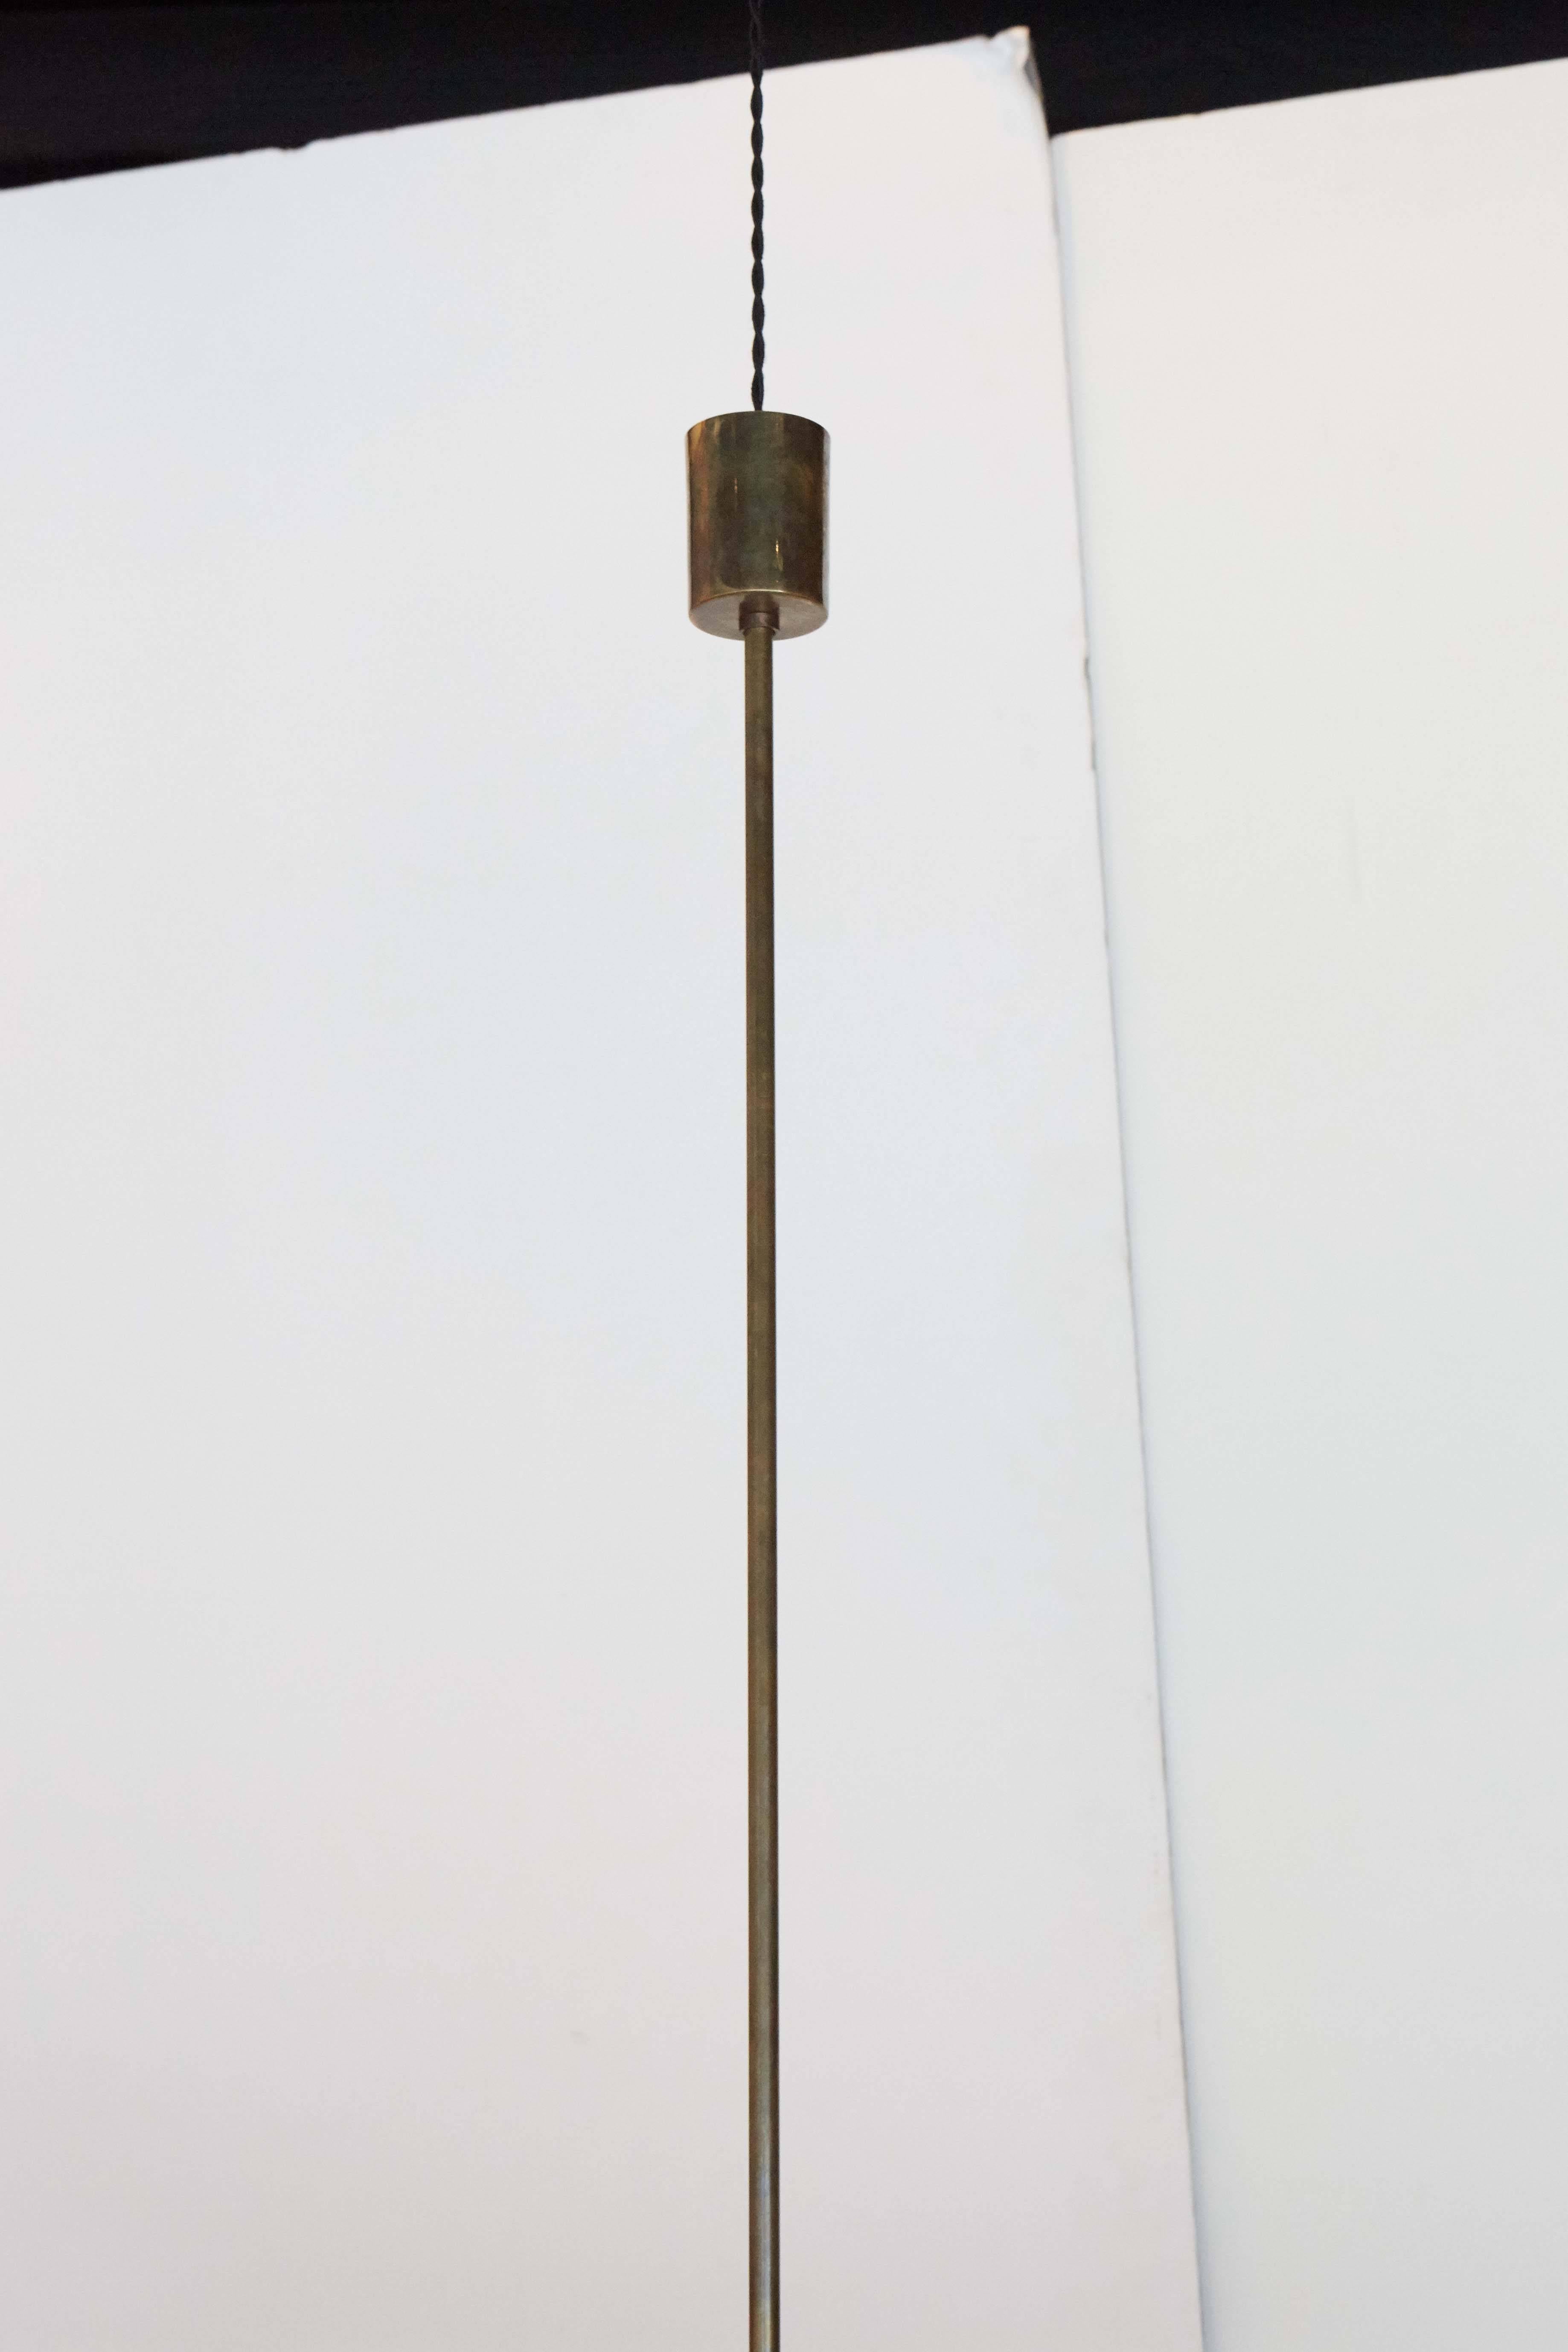 A brass and enameled metal / aluminum ceiling pendant.
Has been rewired for safety.